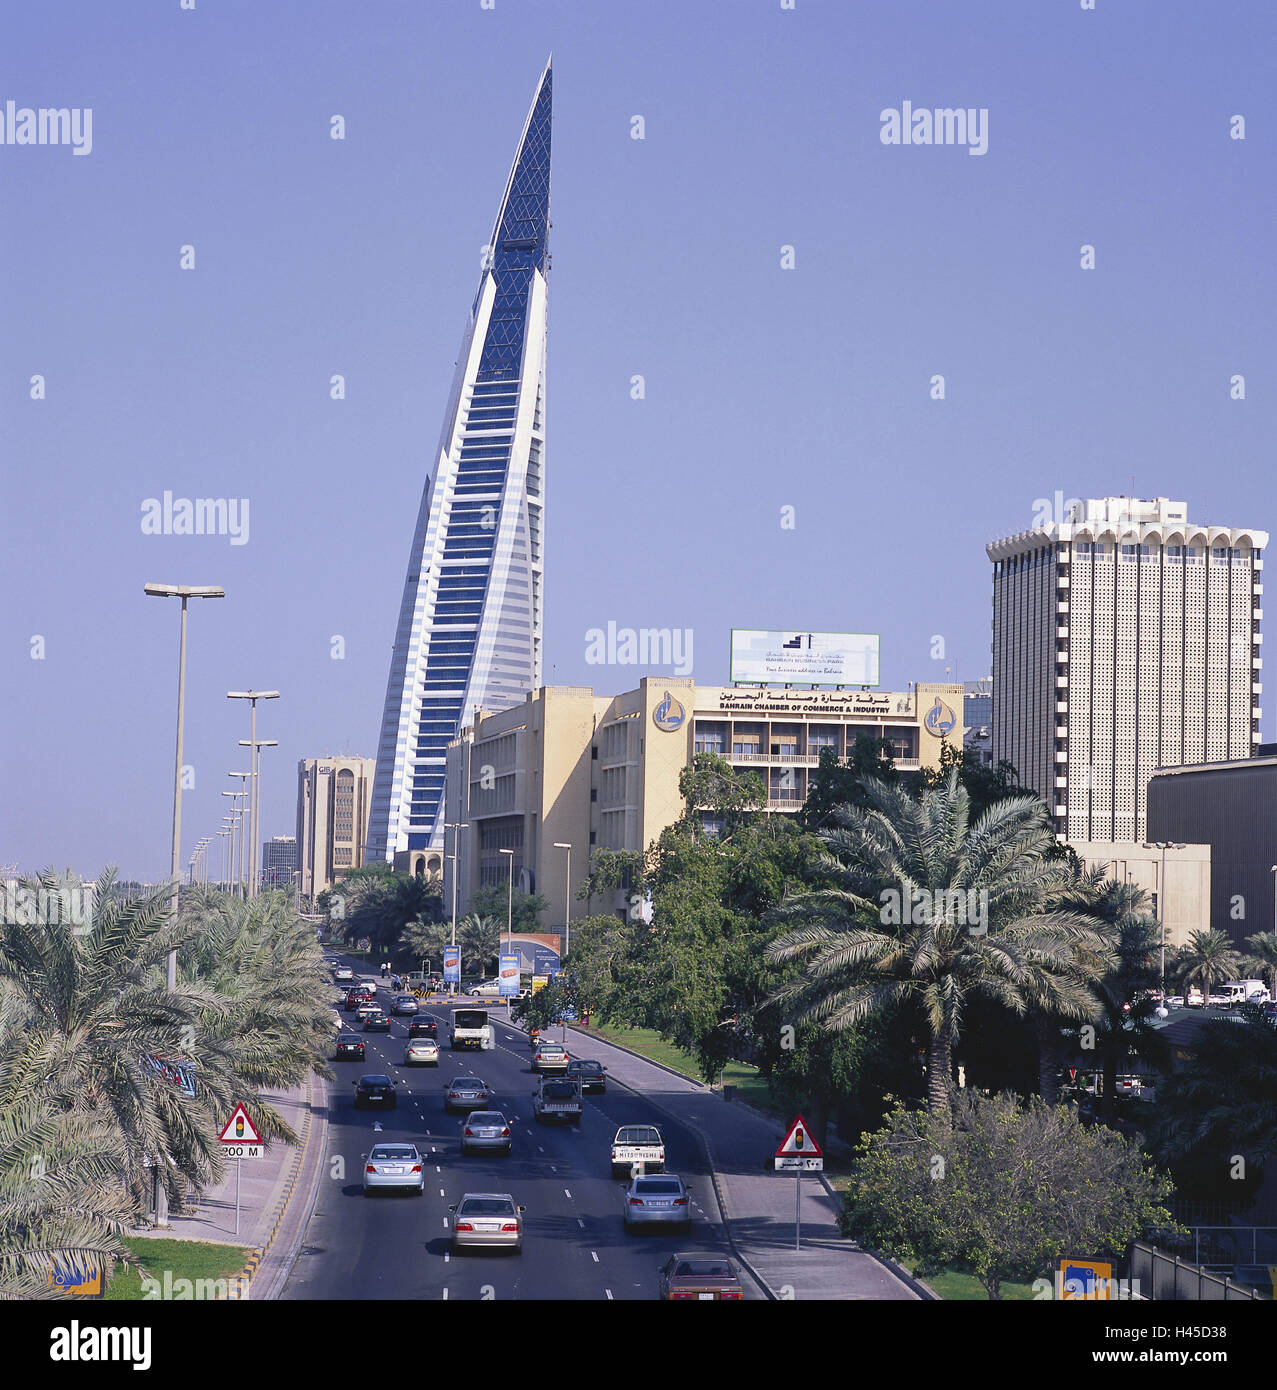 Bahrain, island Manamah, Manama, town view, World Trade centre, island state, sheikdom, destination, town, capital, building, structure, architecture, business premises, skyscraper, facade, glass front, architecture, heaven, cloudless, street, traffic, cars, palms, Stock Photo